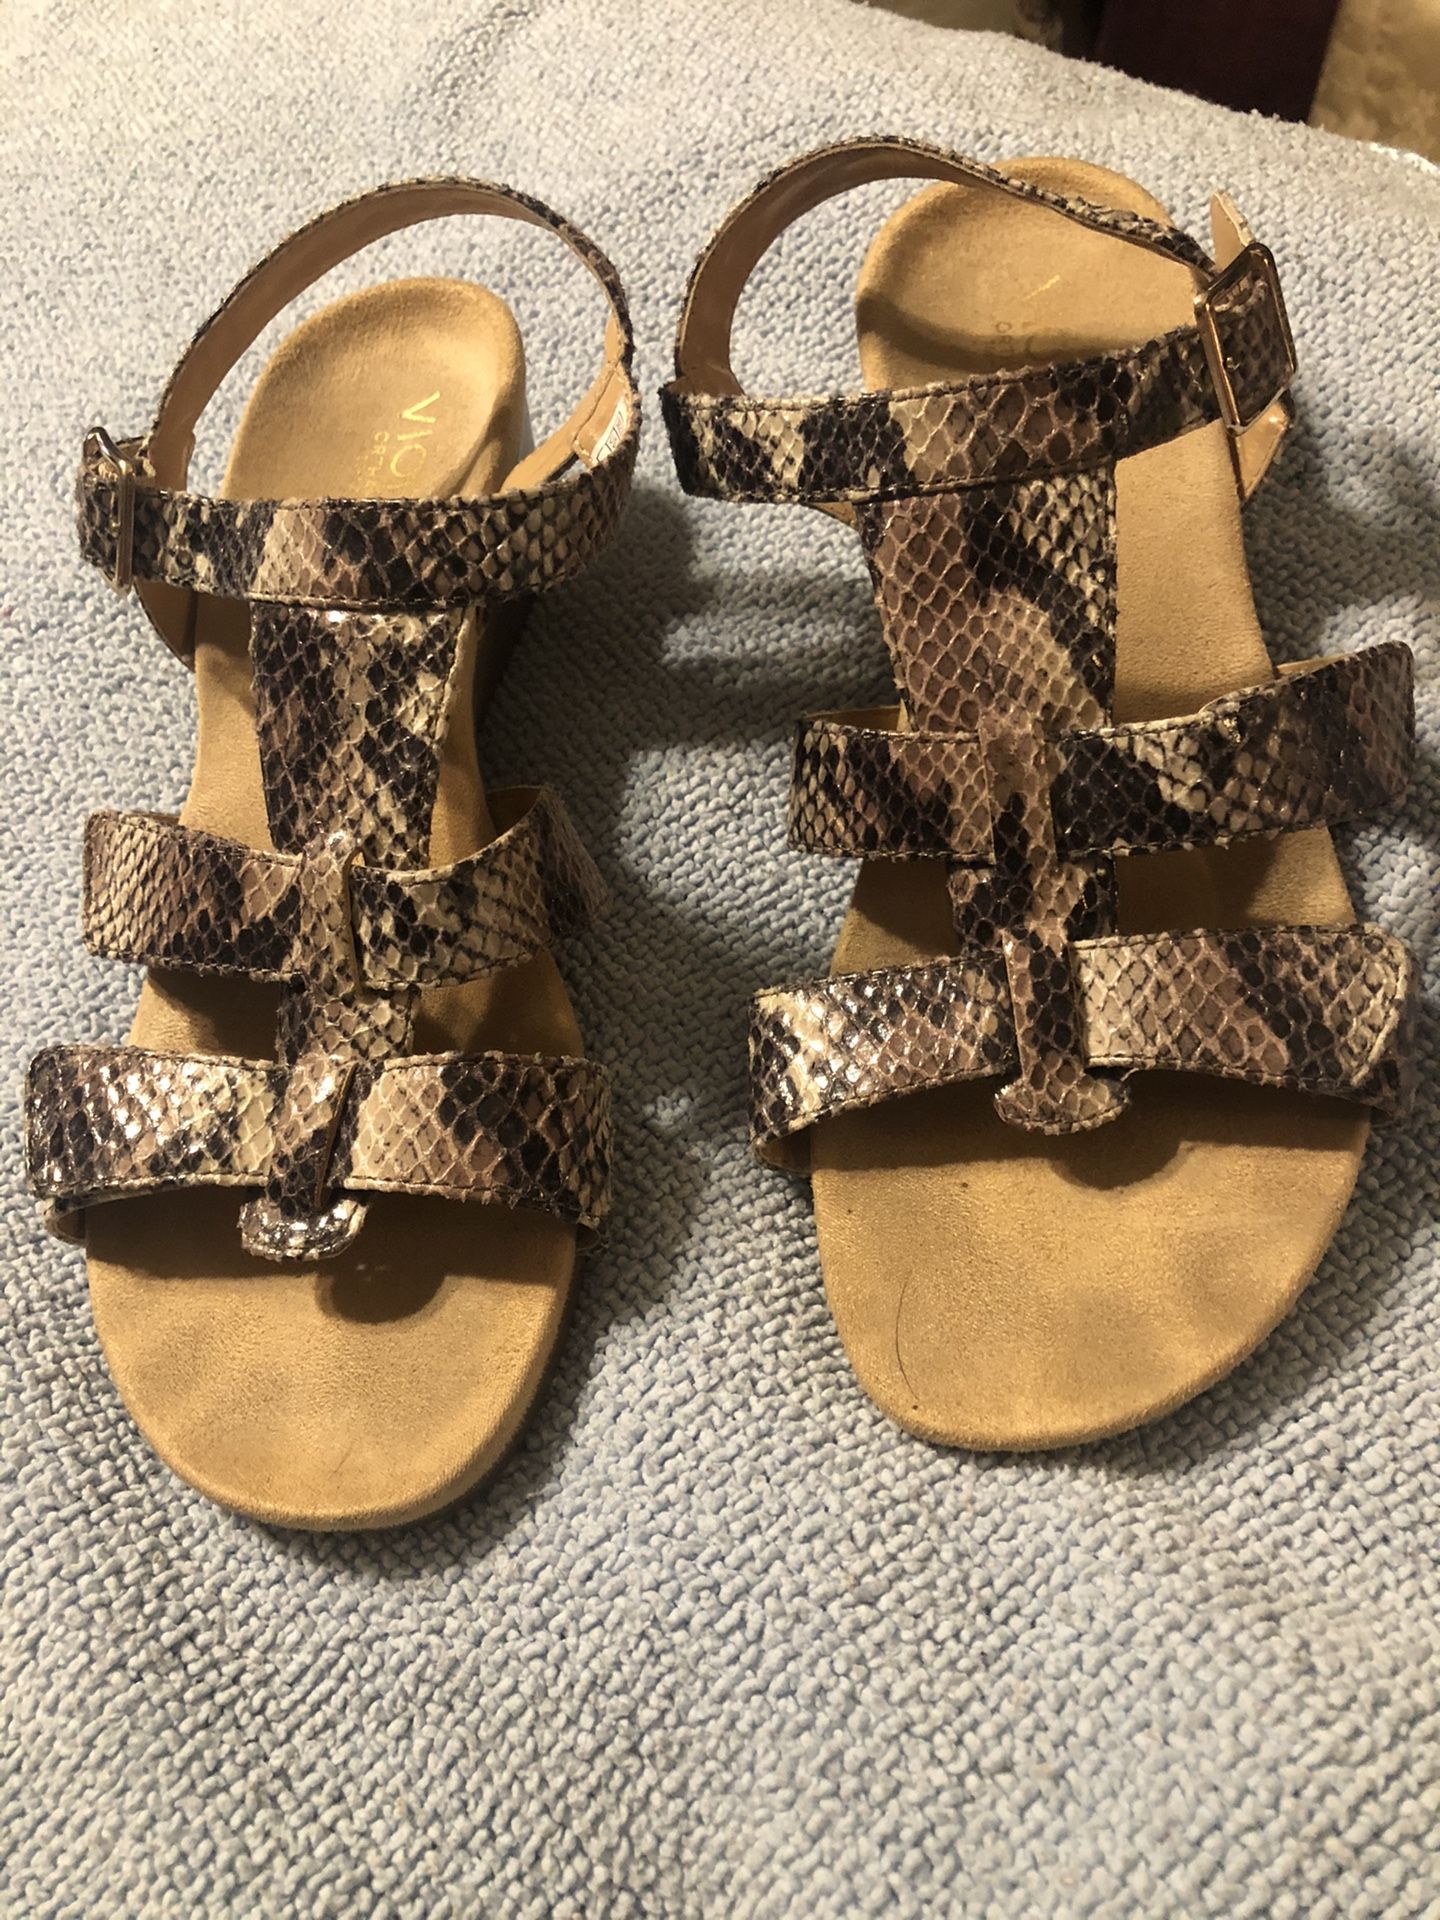 Vionic Orthaheel Wedge Sandals Snake print Sz  8 Excellent condition